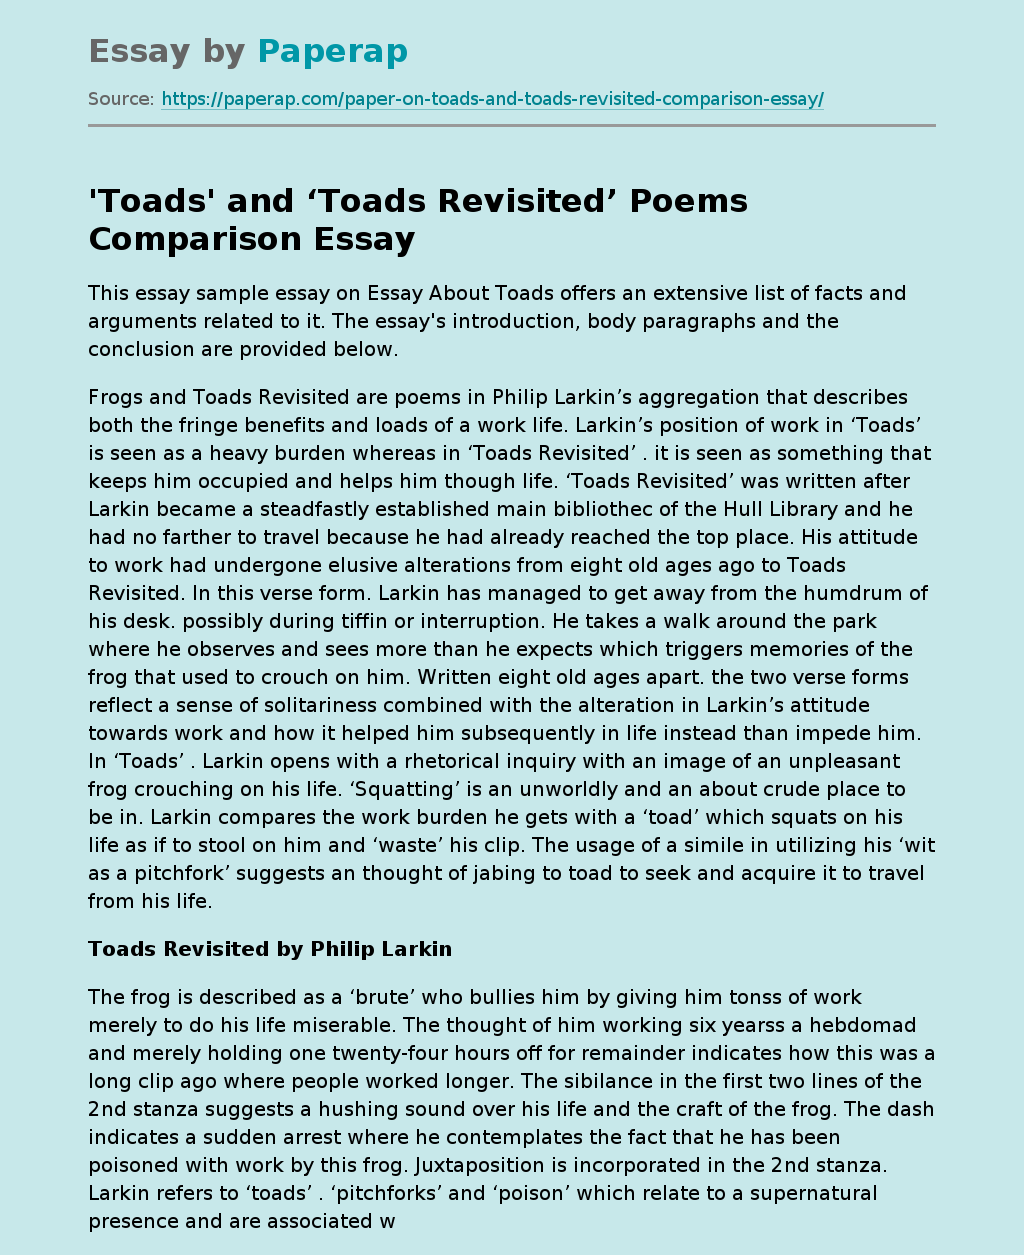 'Toads' and ‘Toads Revisited’ Poems Comparison